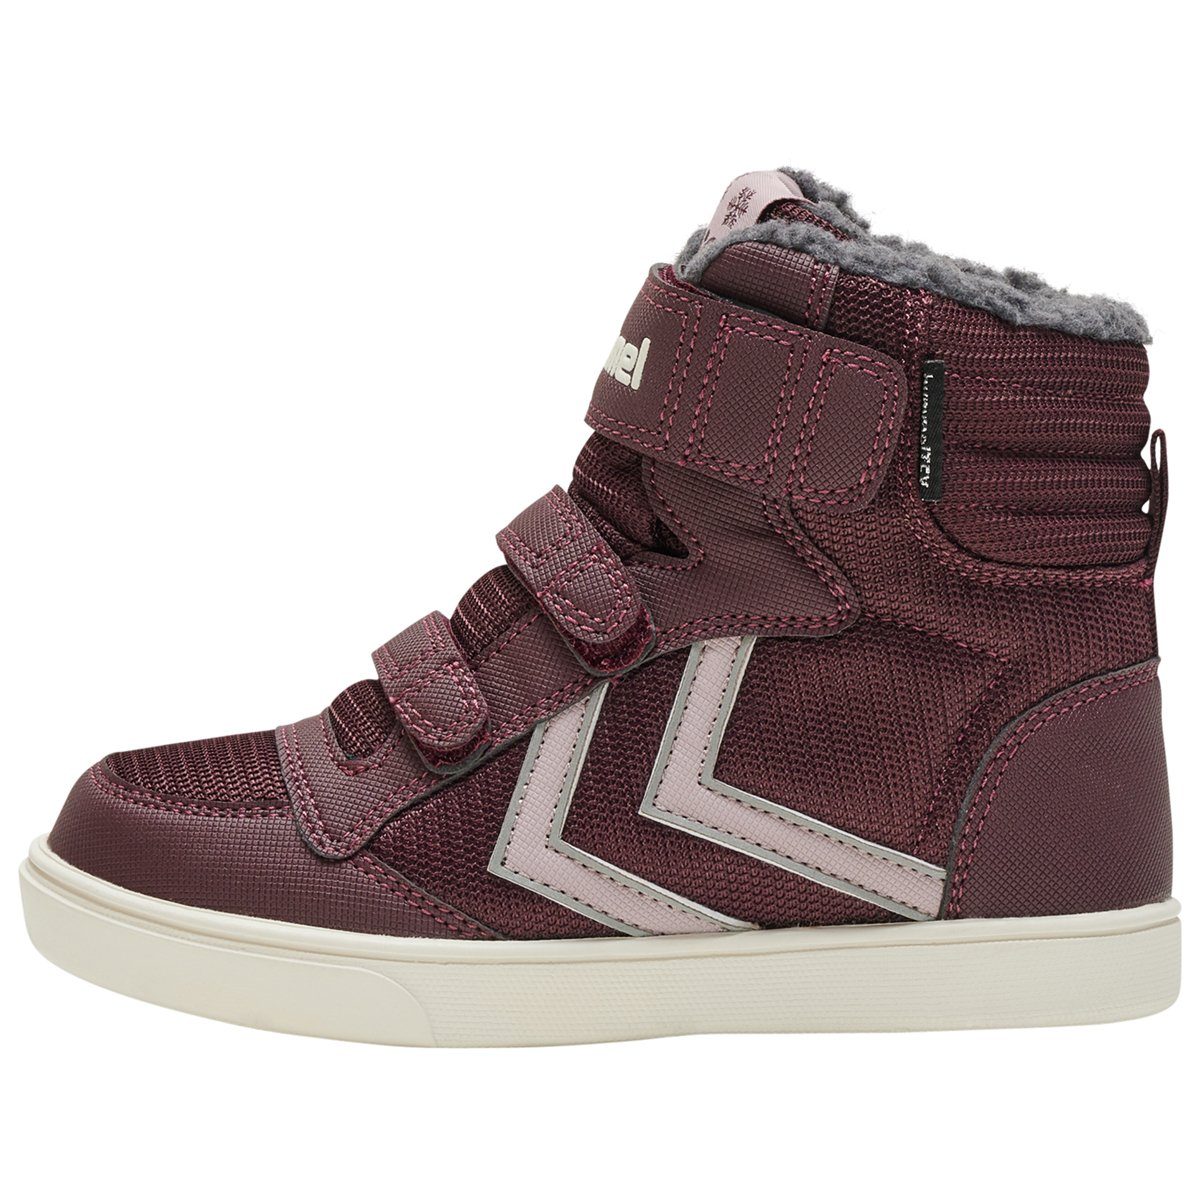 hummel STADIL SUPER POLY JR MID RECYCLE Sneaker BOOT